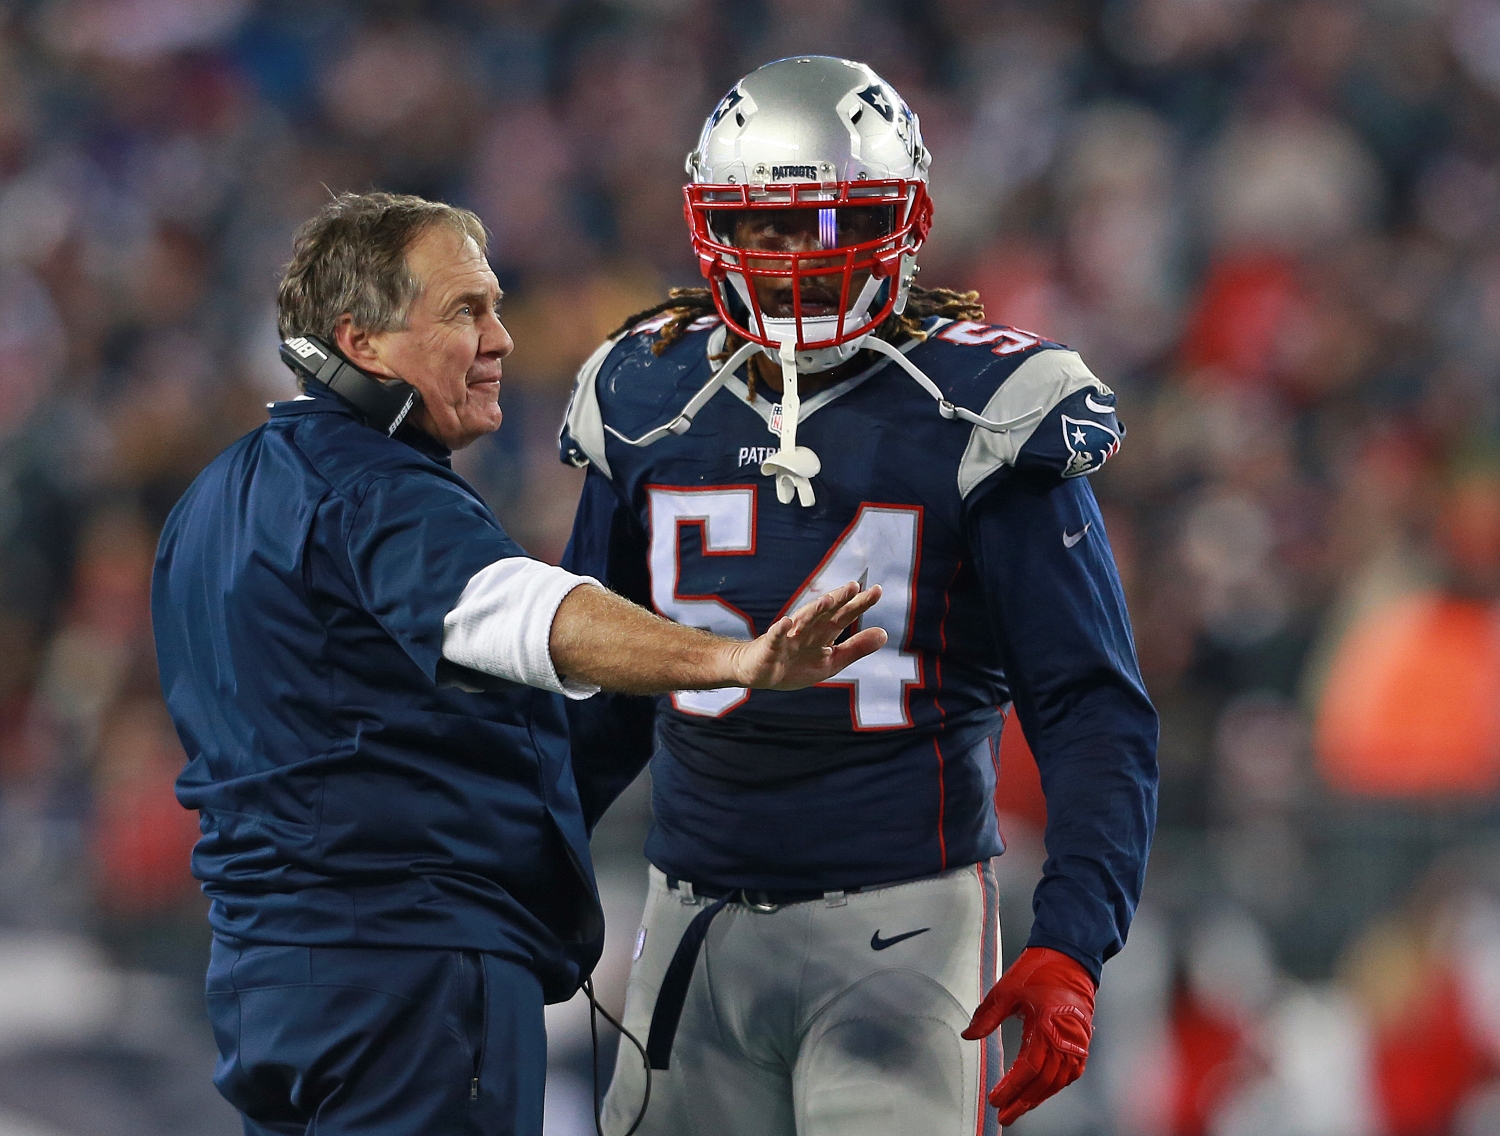 Bill Belichick speaks to linebacker Dont'a Hightower during a Patriots game.